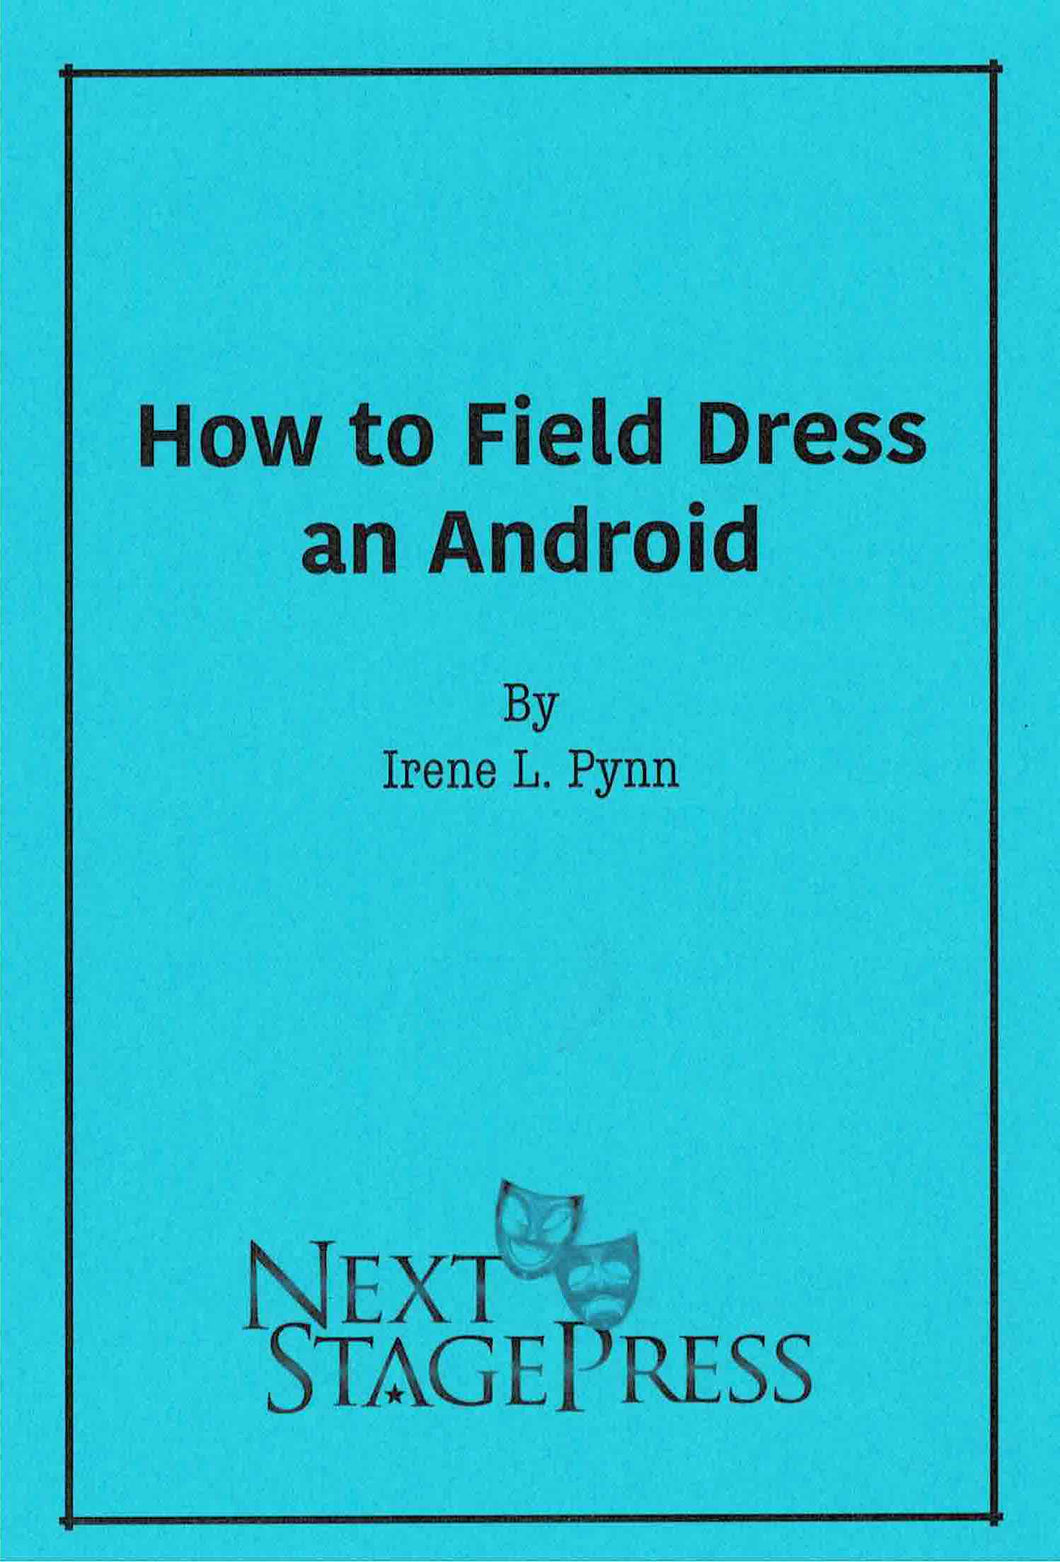 How to Field Dress an Android - Digital Version